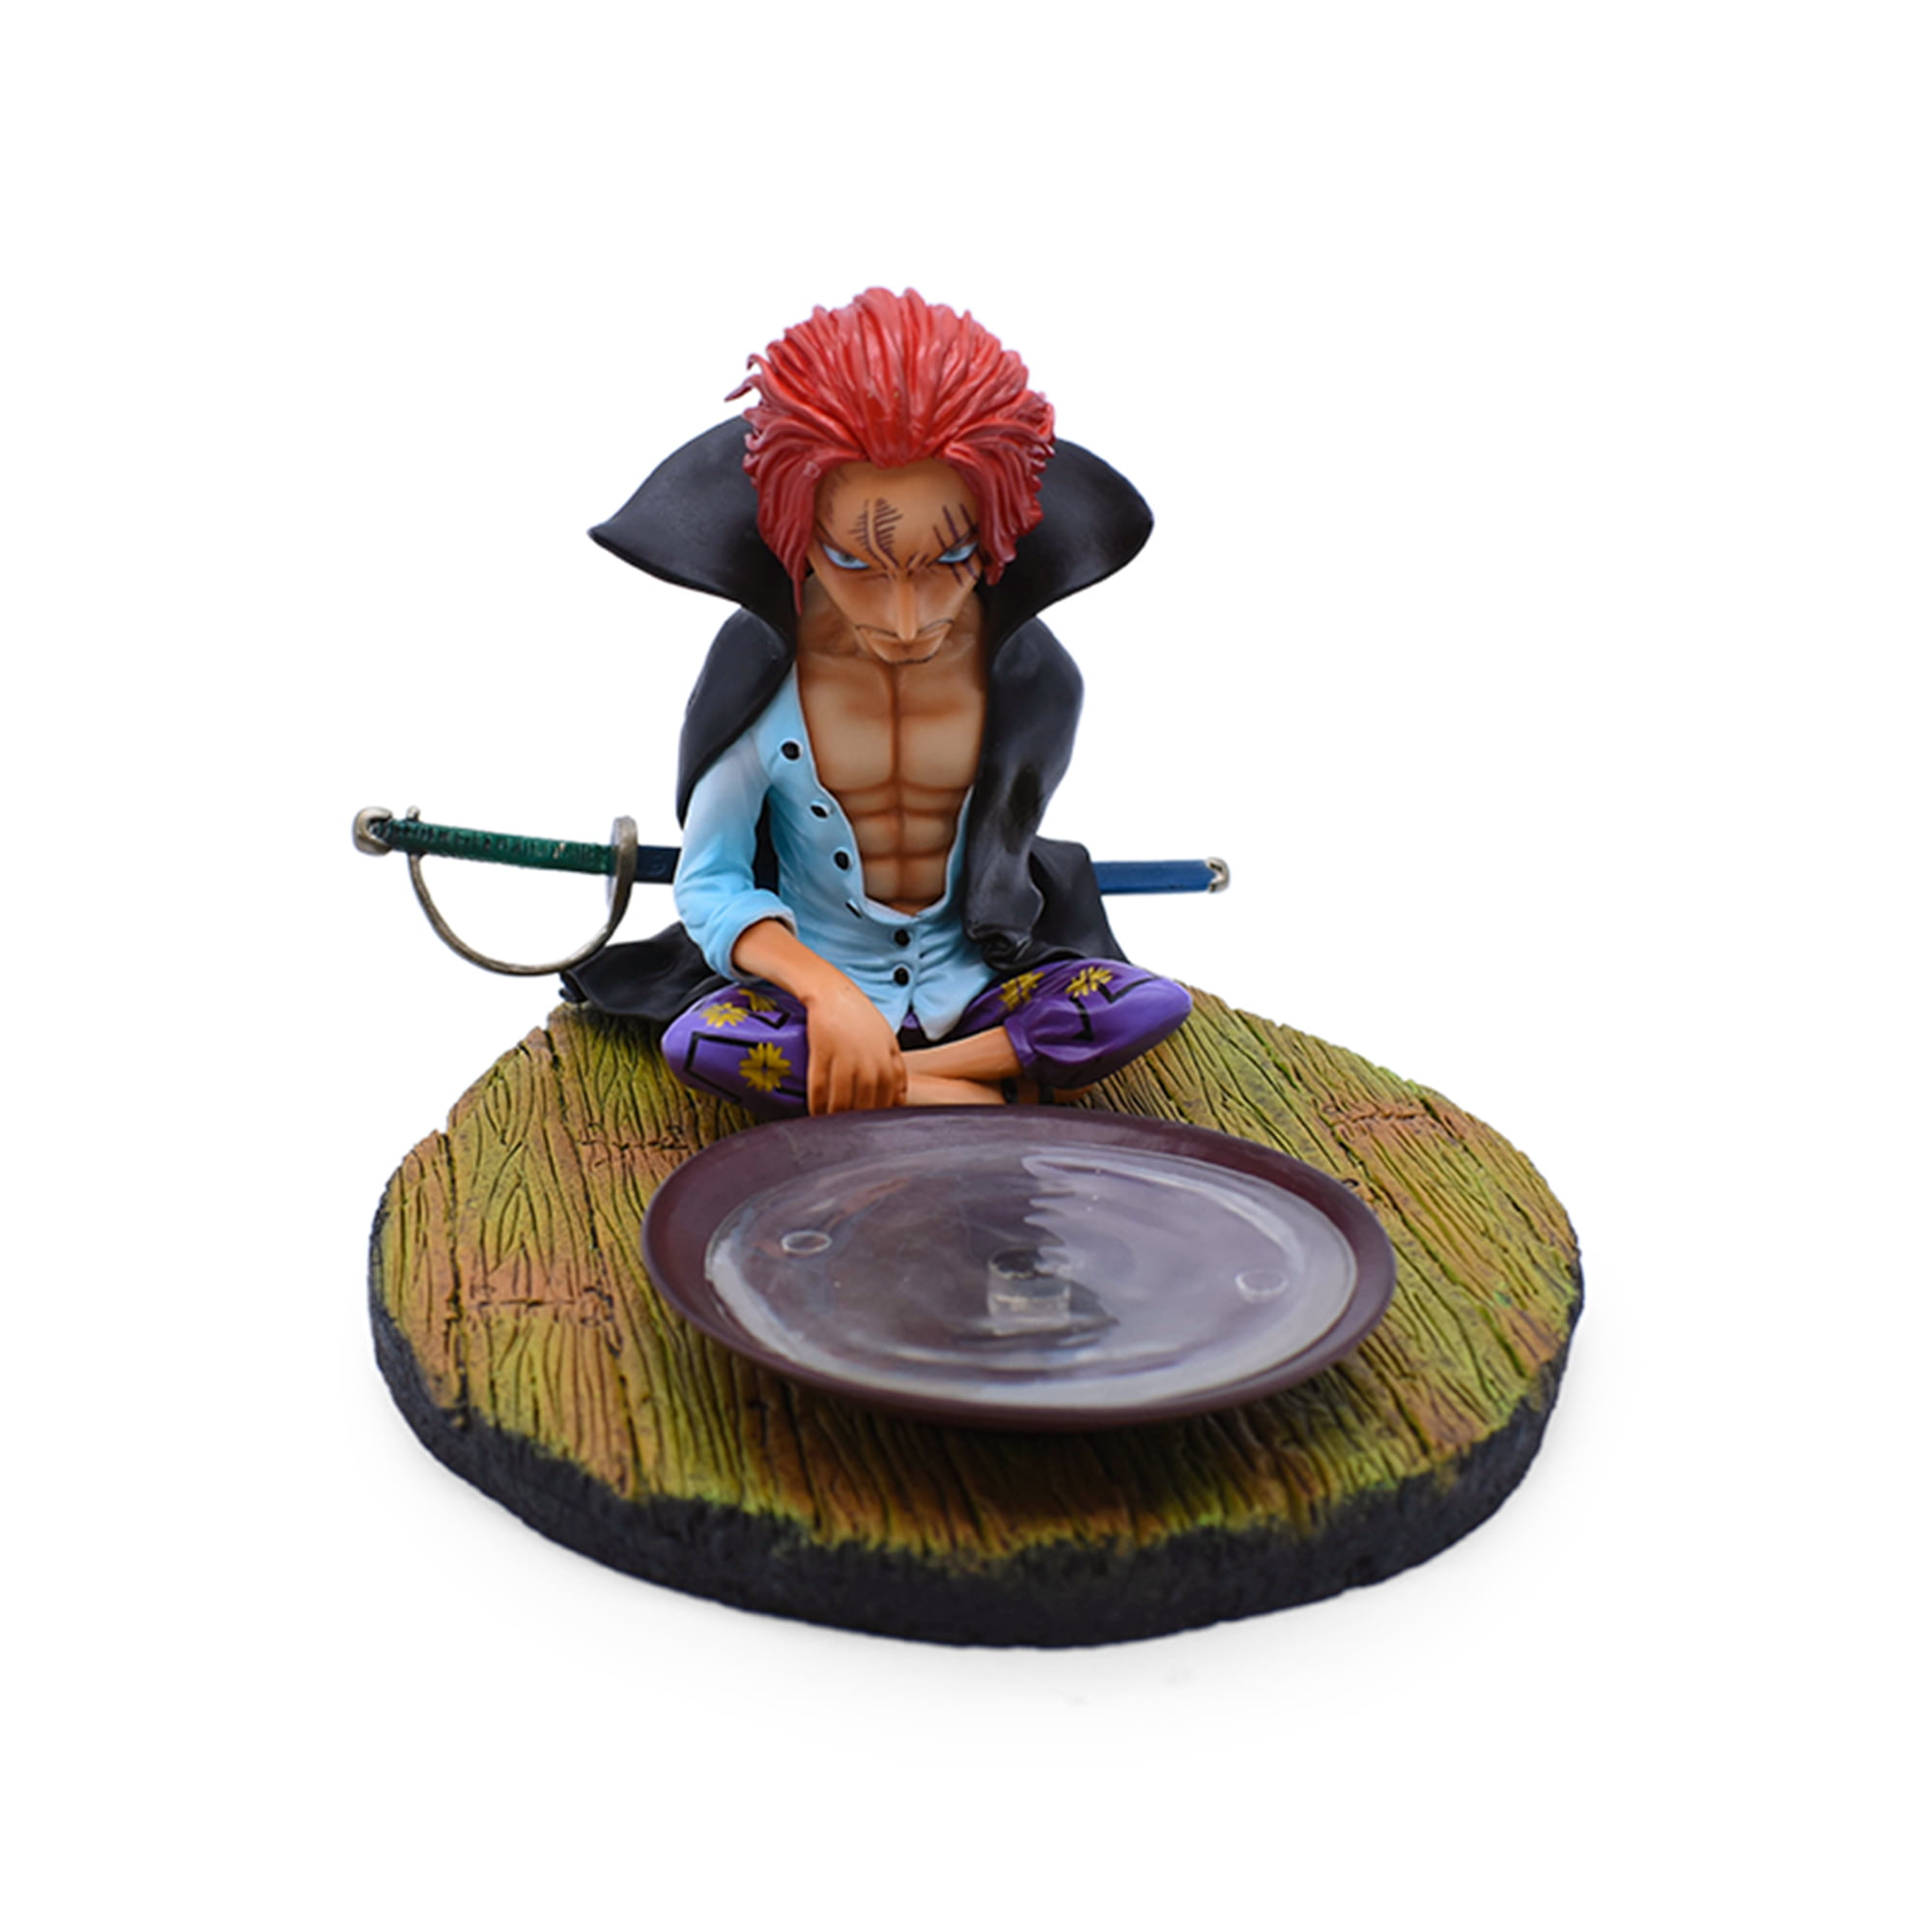 in de tussentijd Specialiteit Archeoloog Joinfuny One Piece 5.6" Action Figures Shanks Drinking Beer Limited Edition  Figurine PVC Model - Walmart.com